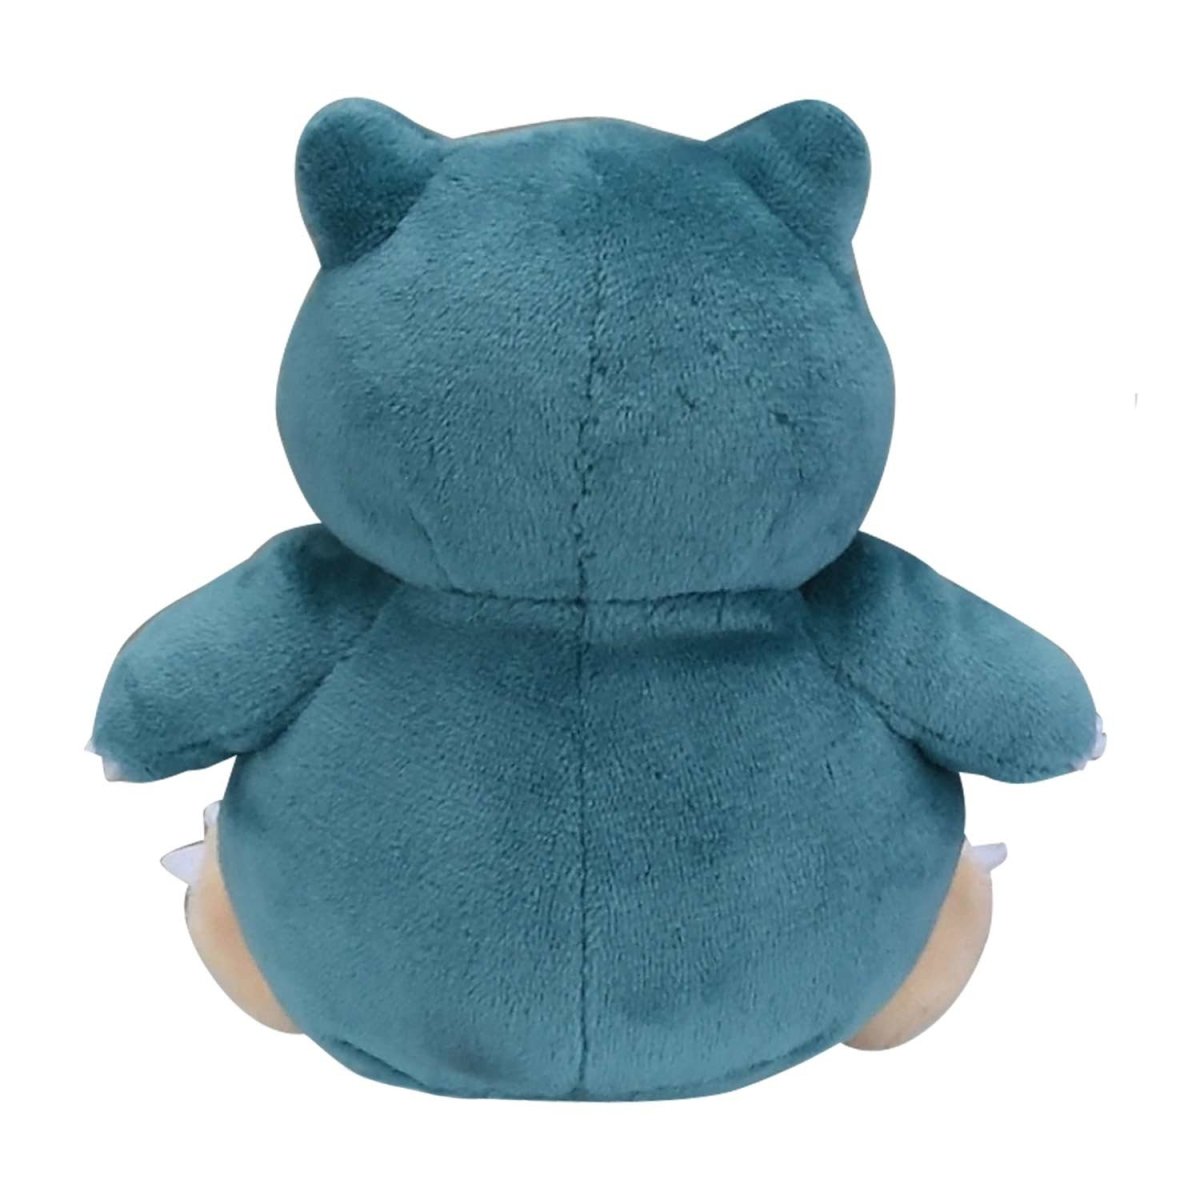 Snorlax Sitting Cuties Plush - 5 In. | Pokémon Center Official Site